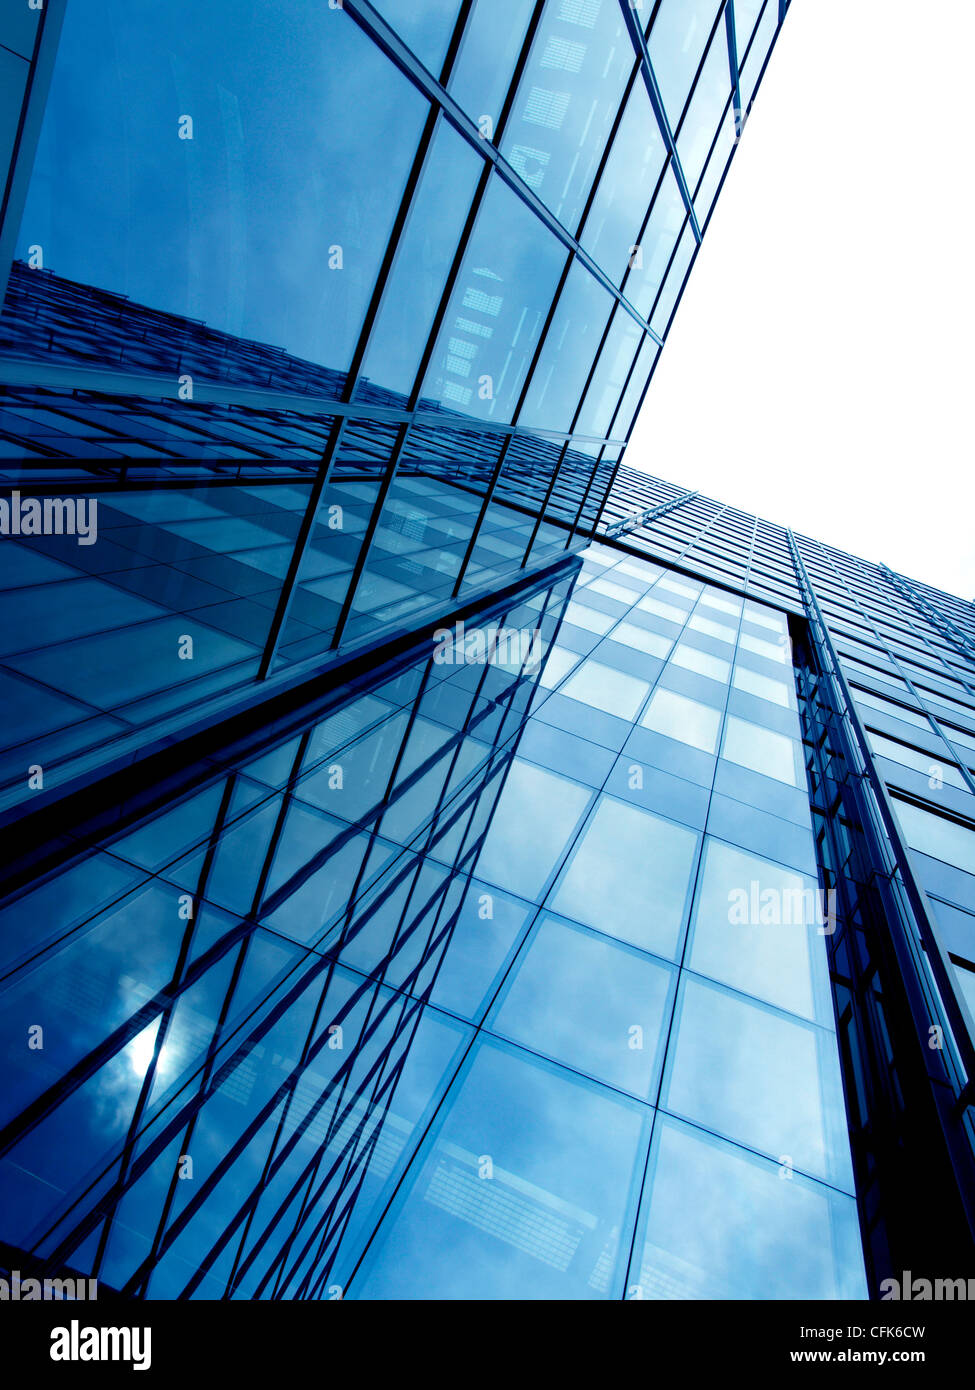 Business building in blue with reflections Stock Photo